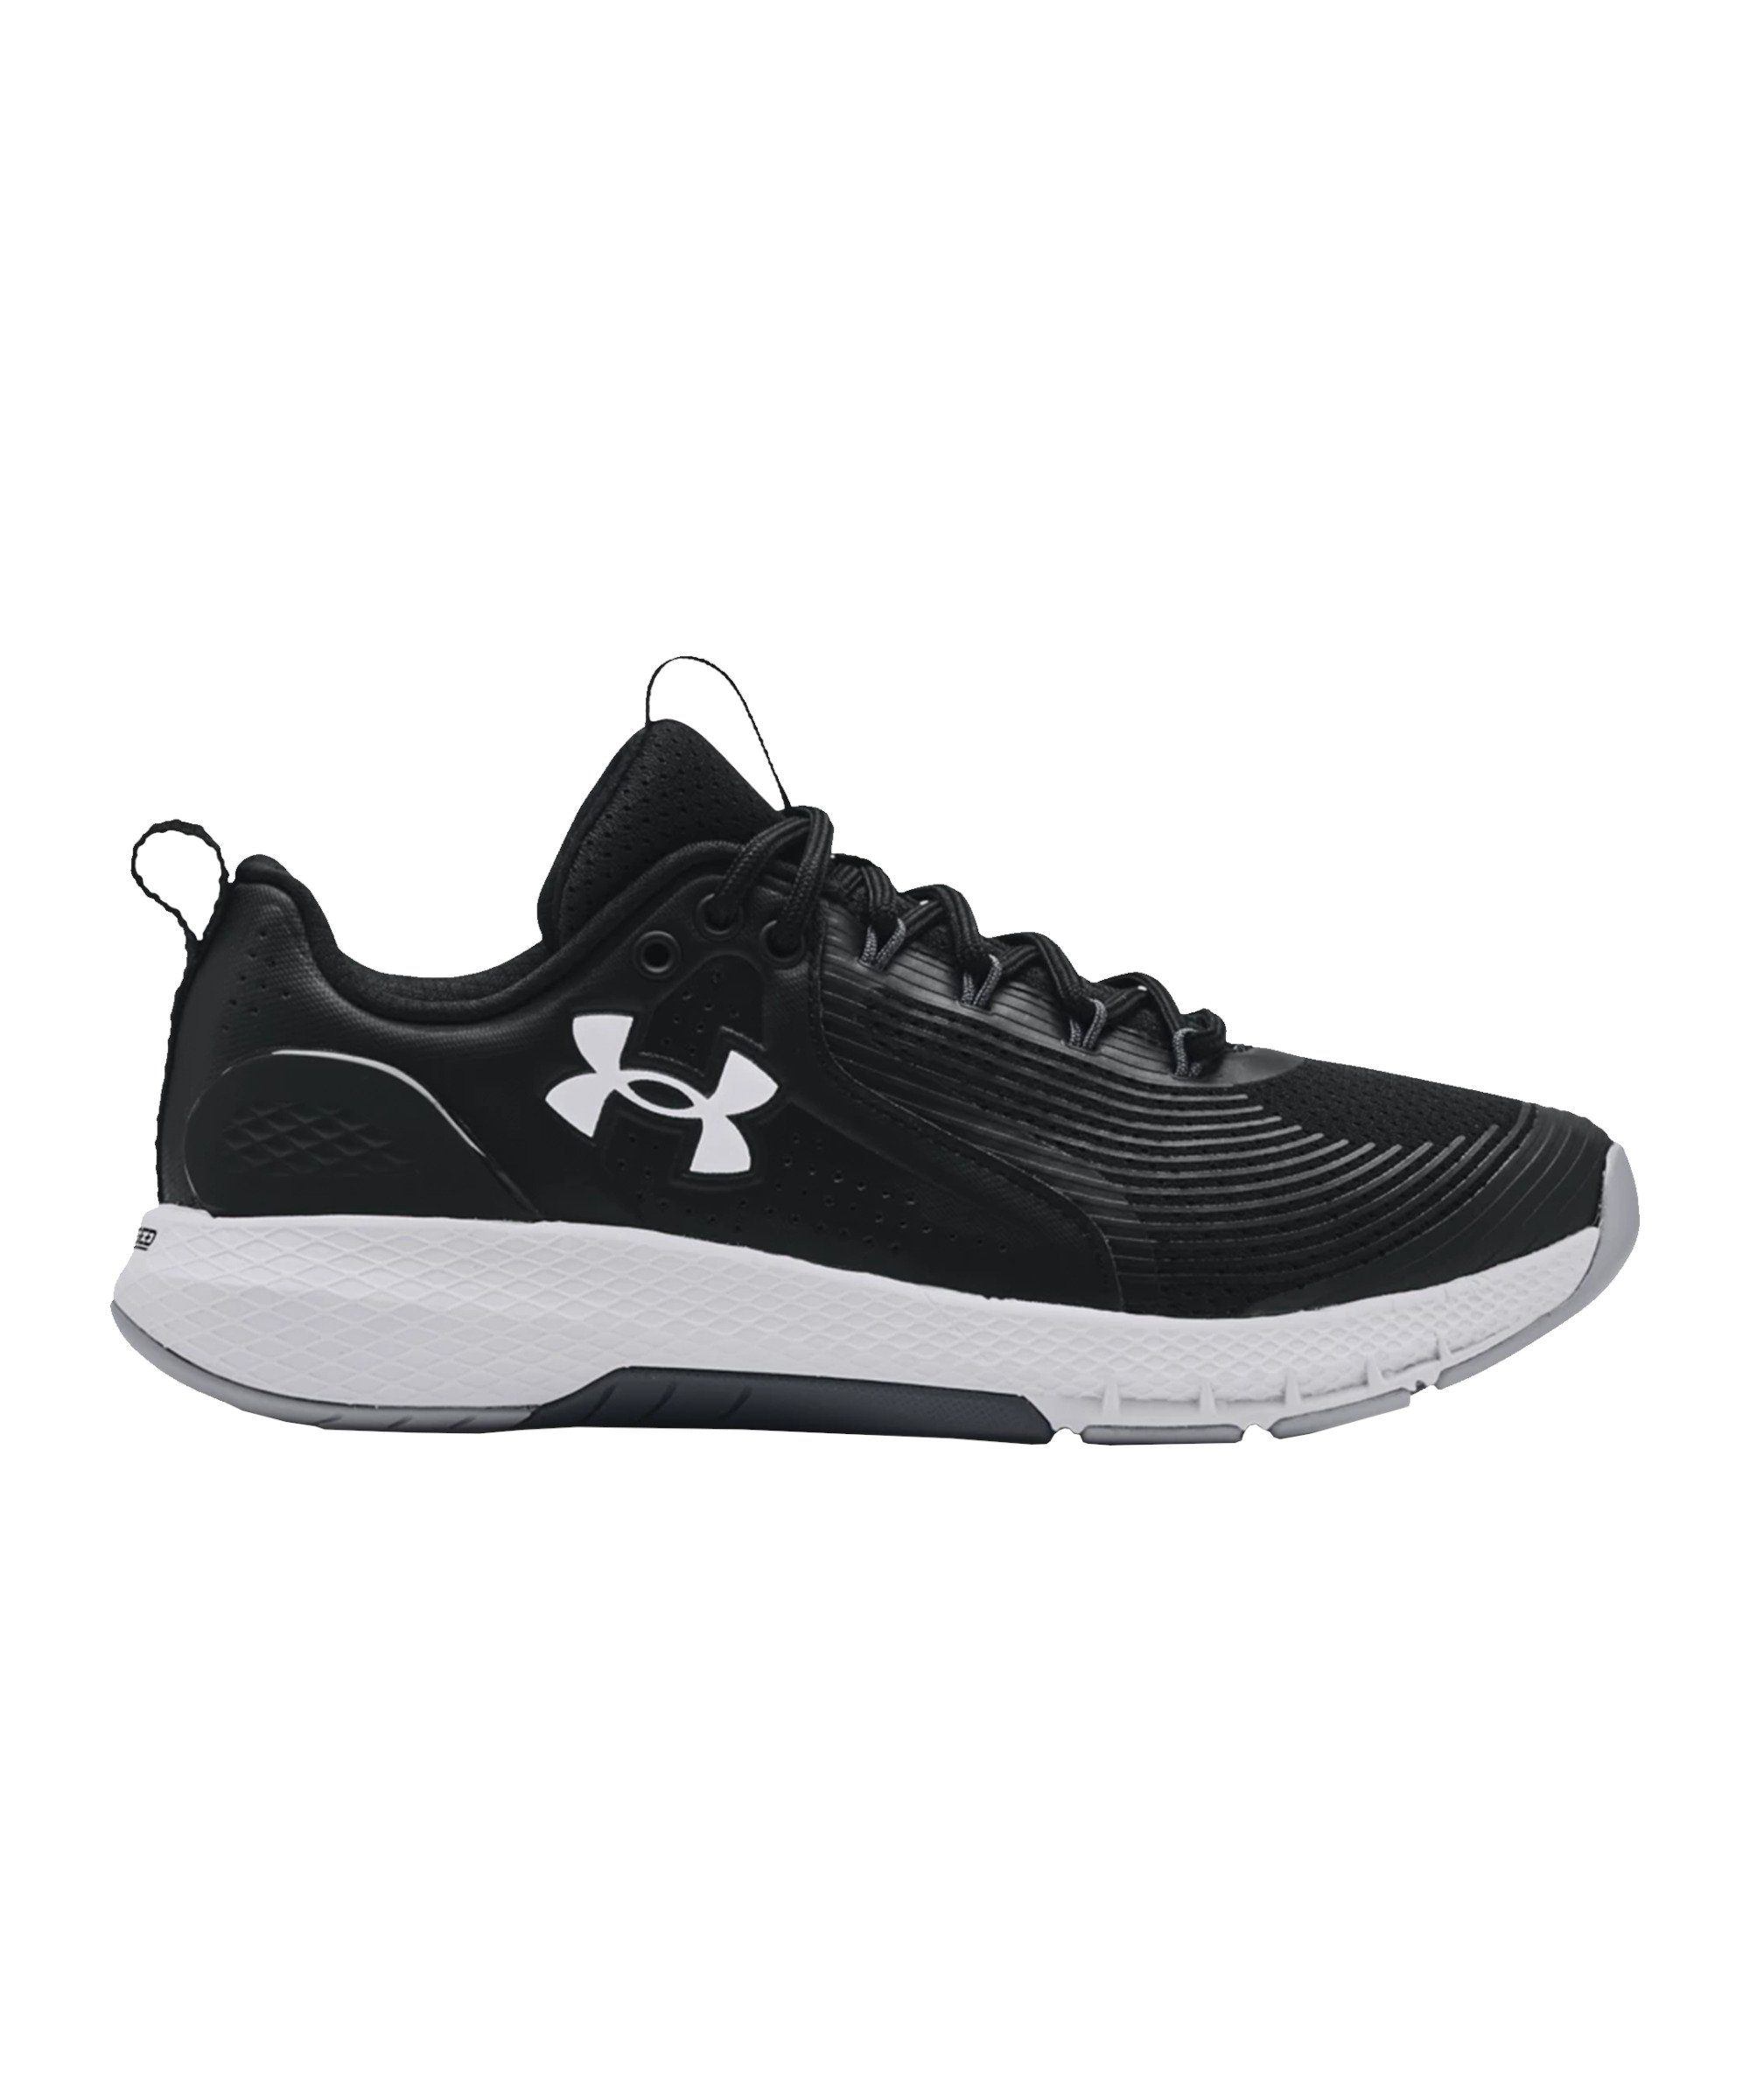 Under Armour® Charged Commit 3 Training Hallenschuh